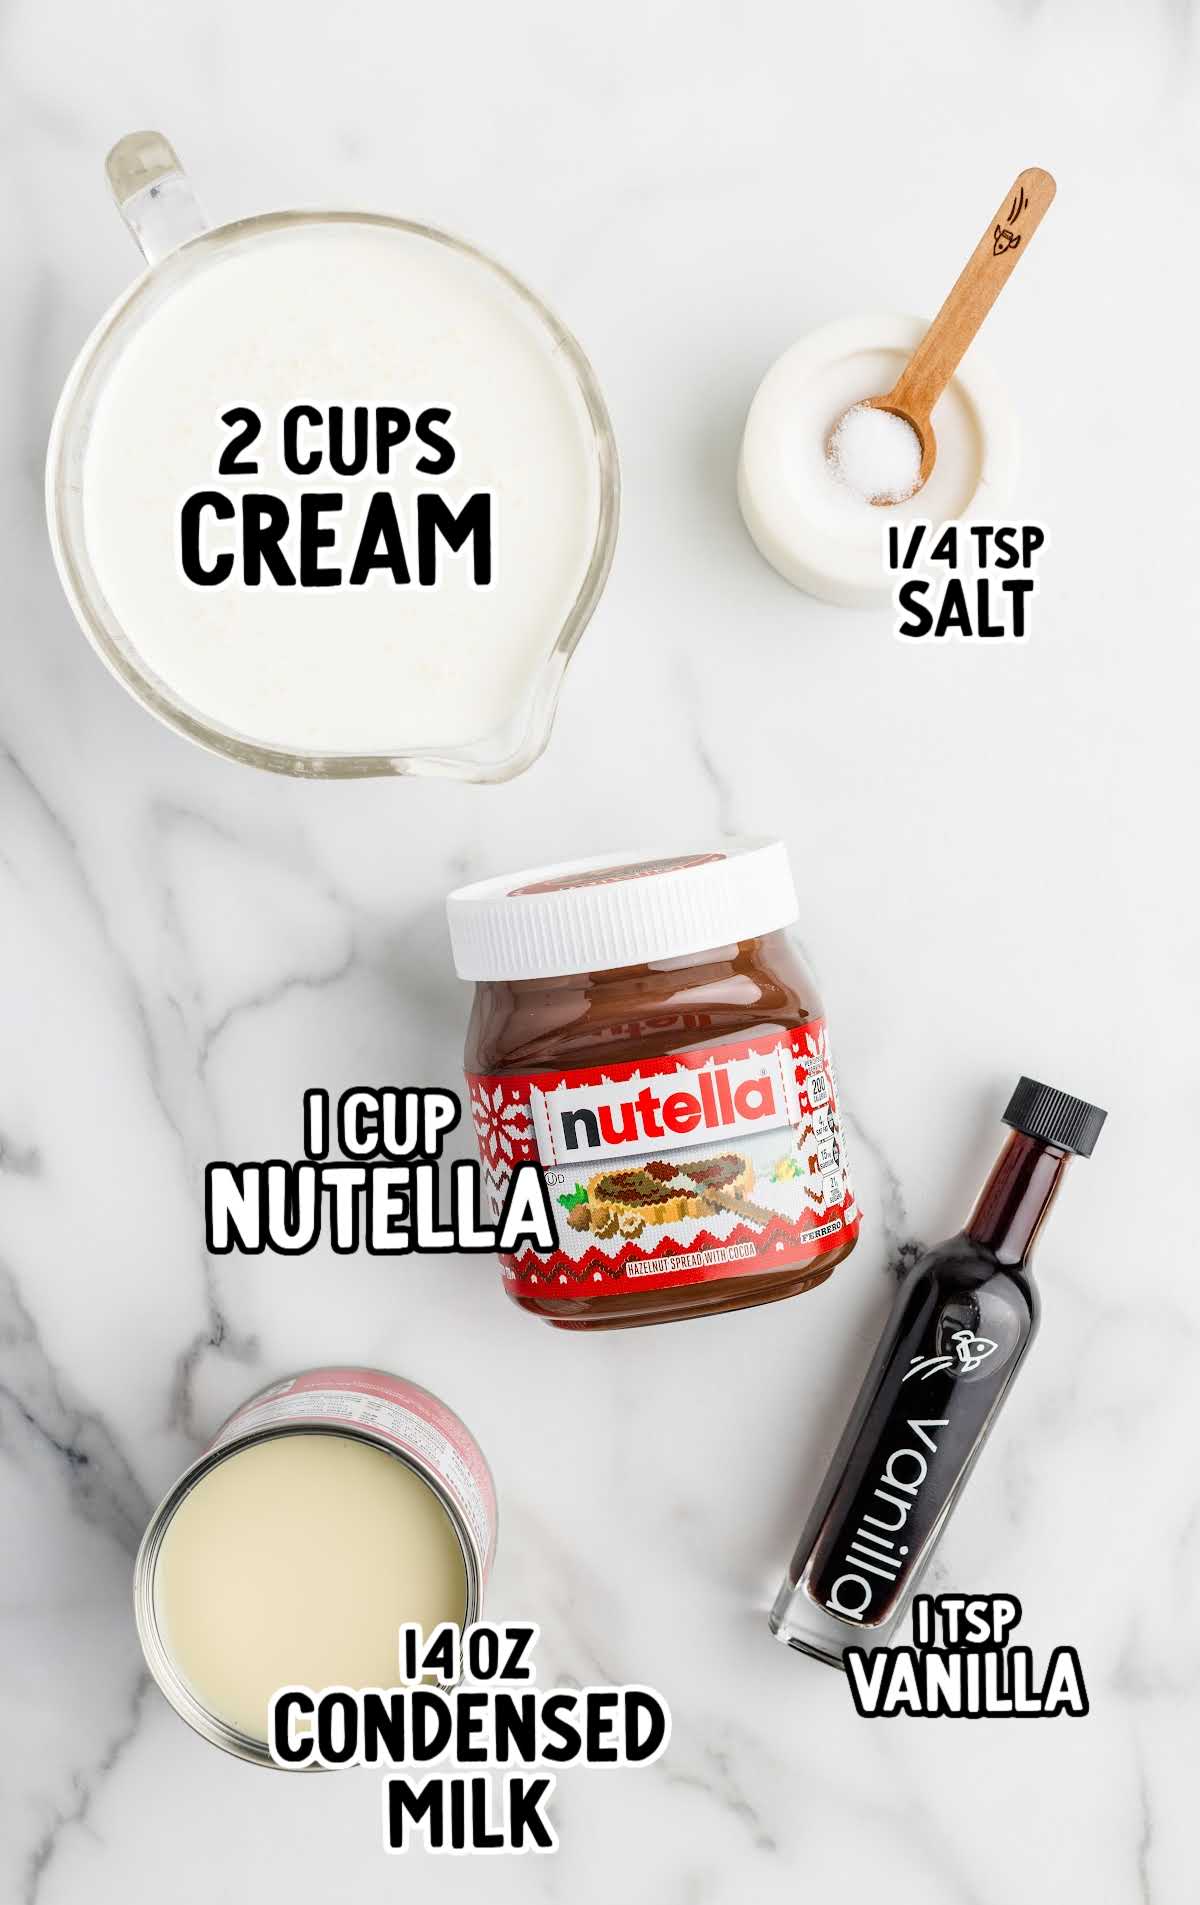 Nutella Ice Cream raw ingredients that are labeled